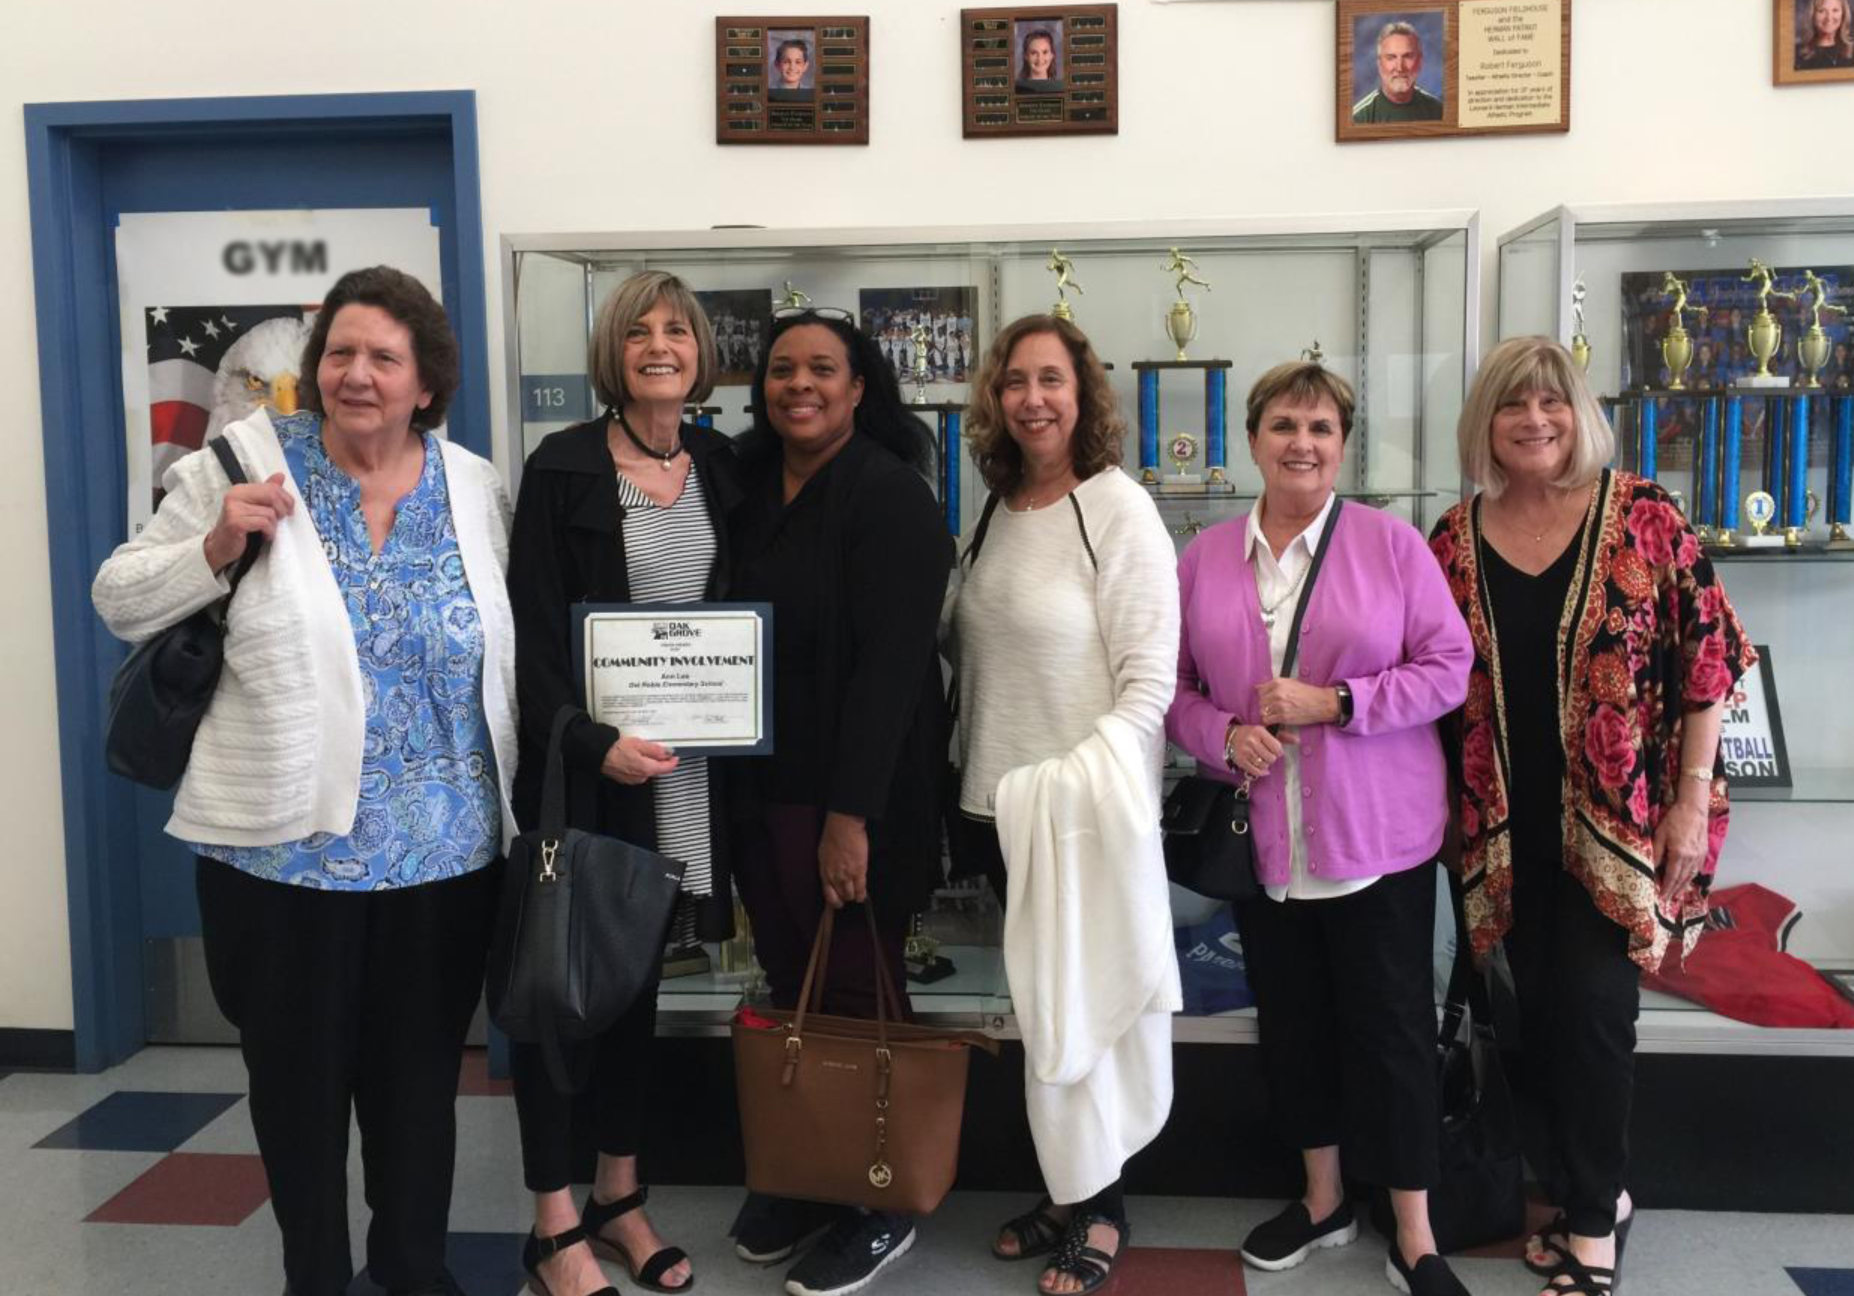 DelRoble RAL volunteers with Community Achievement Award